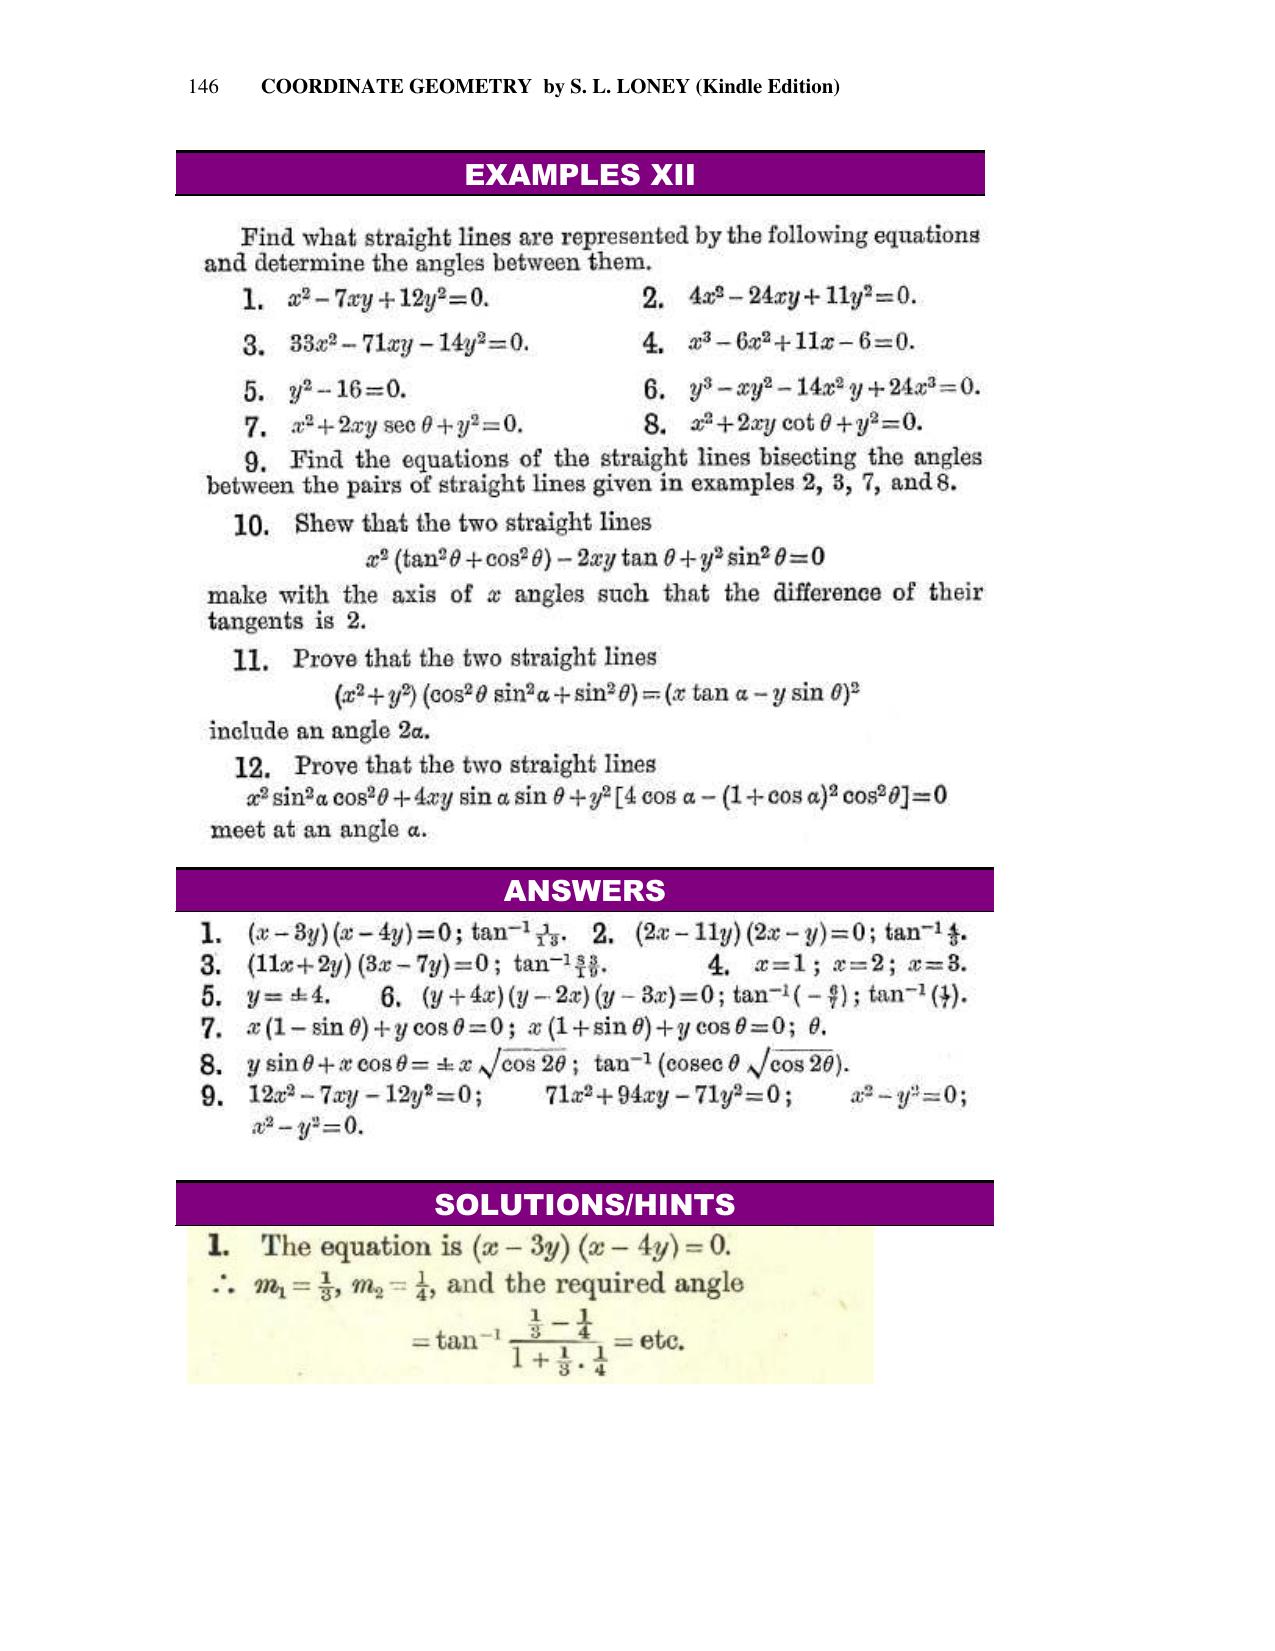 Chapter 6: On Equations Representing Two or More Straight Lines - SL Loney Solutions: The Elements of Coordinate Geometry - Page 7